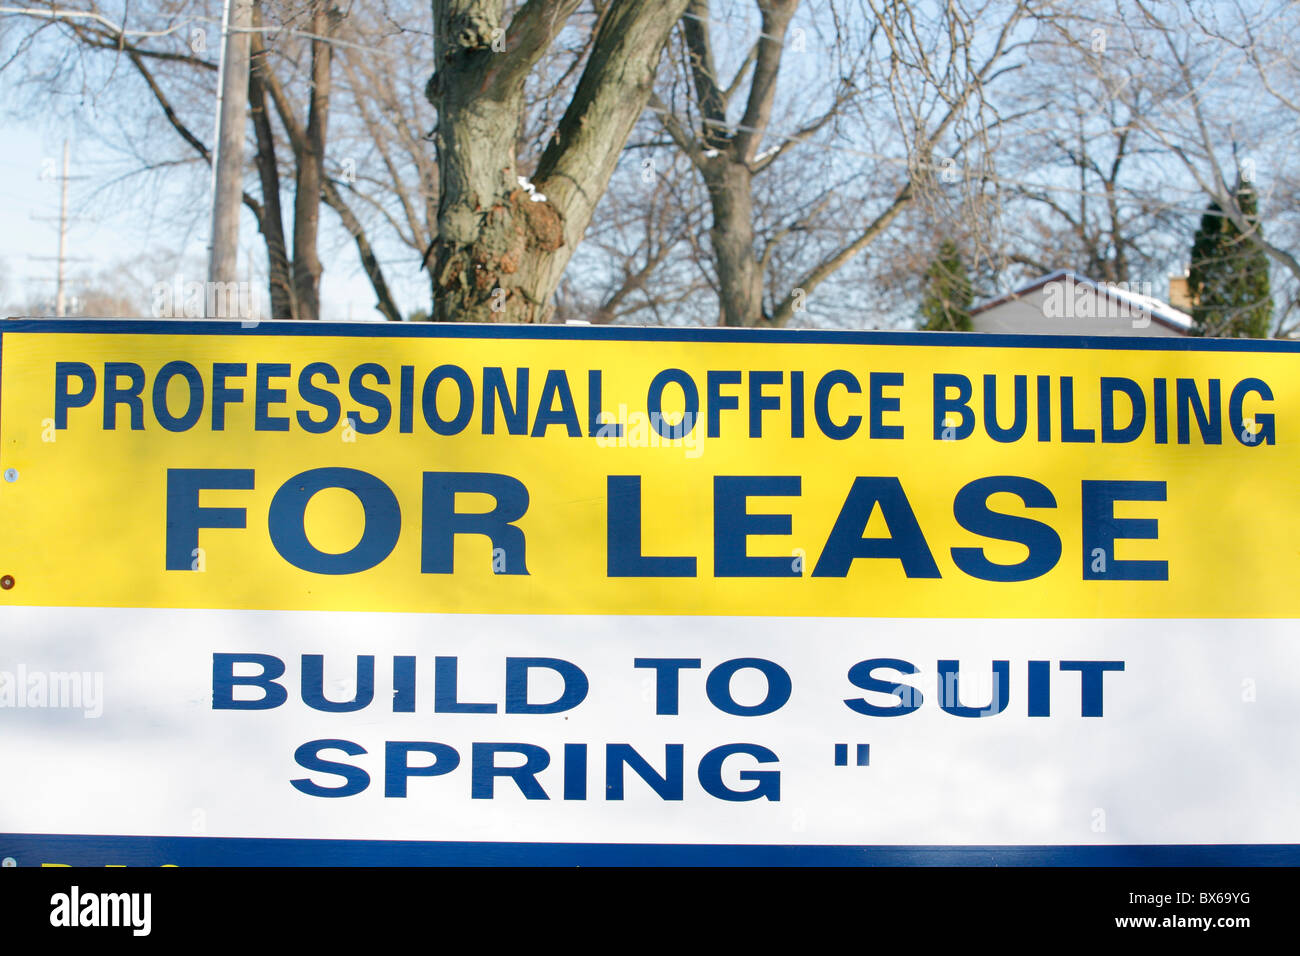 For lease sign Stock Photo